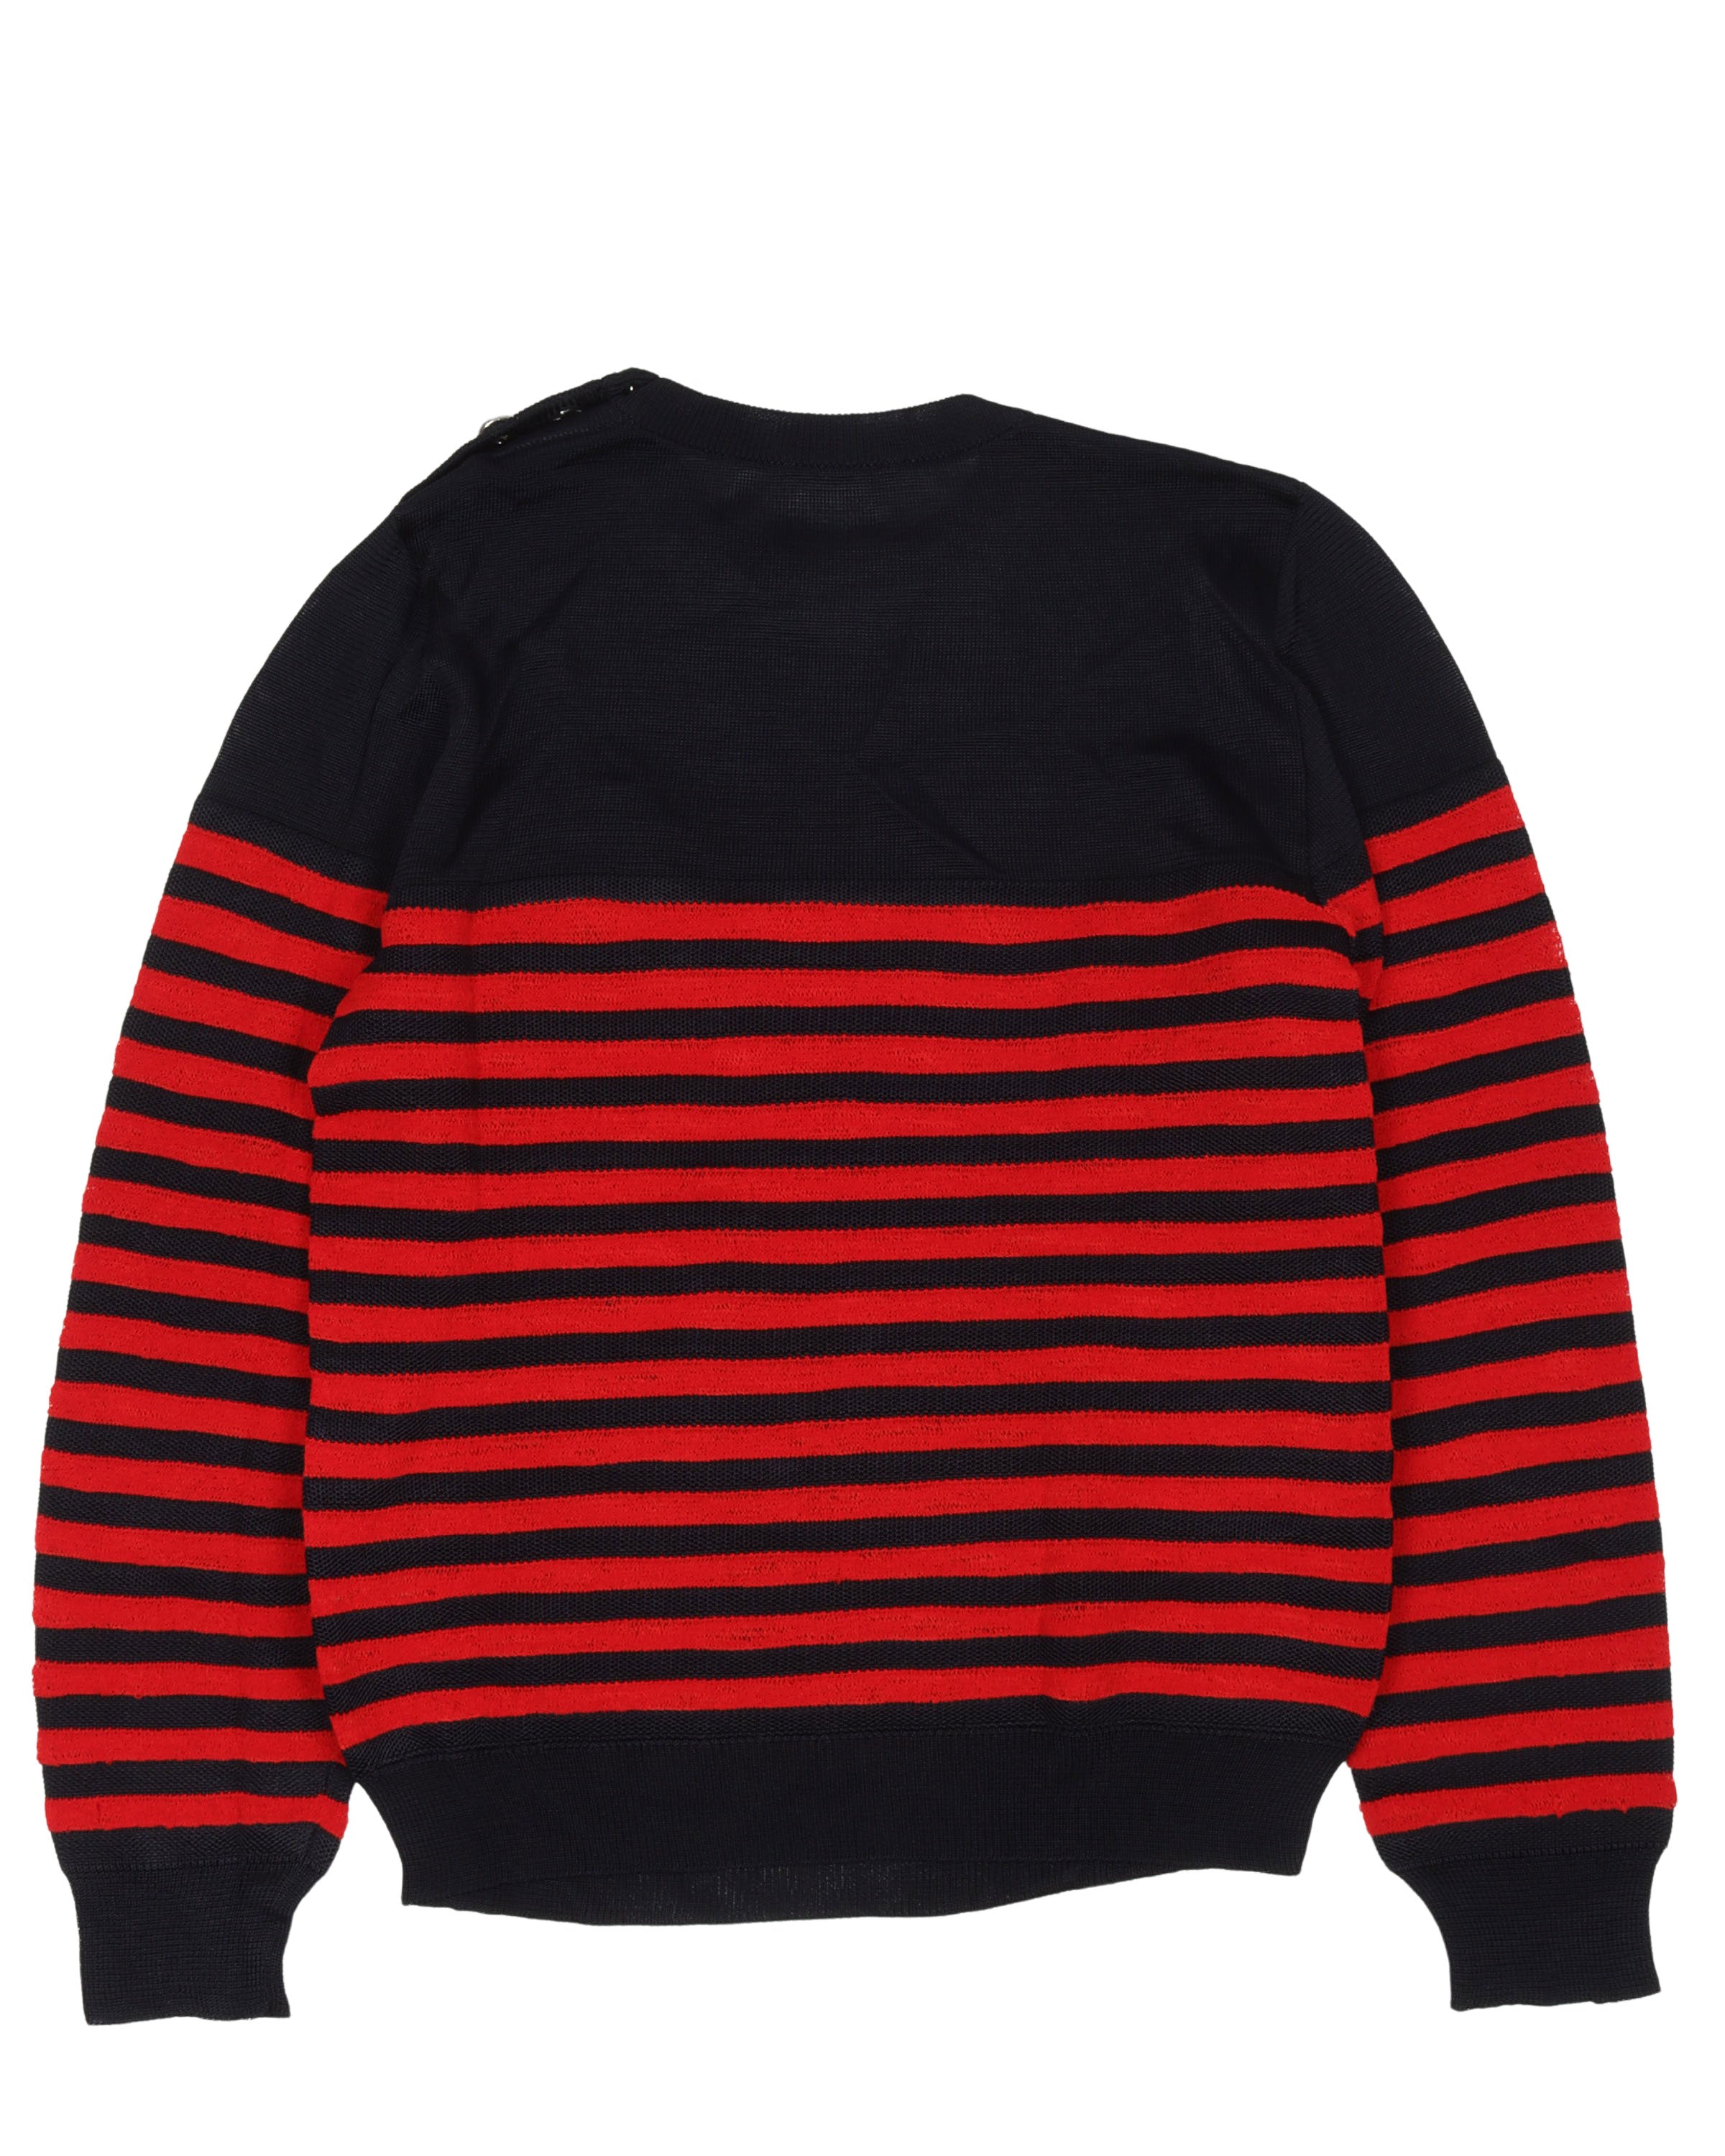 Embroidered Striped Sweater